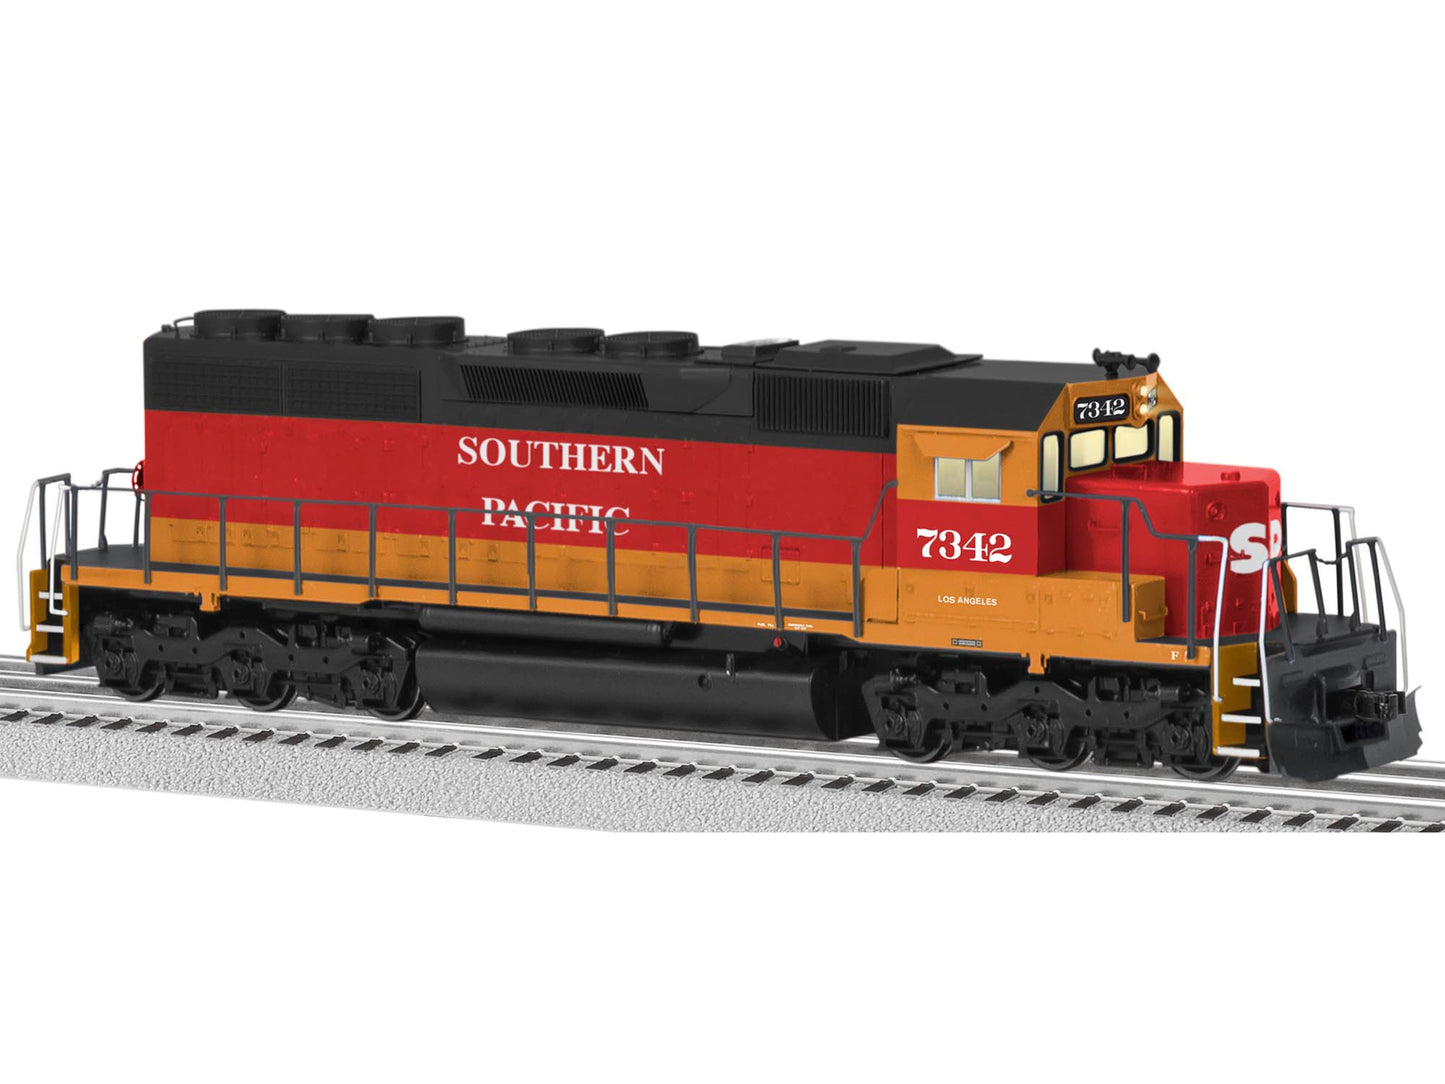 Lionel 6-82287 Southern Pacific 'Daylight' Legacy SD40 Diesel Locomotive #7342